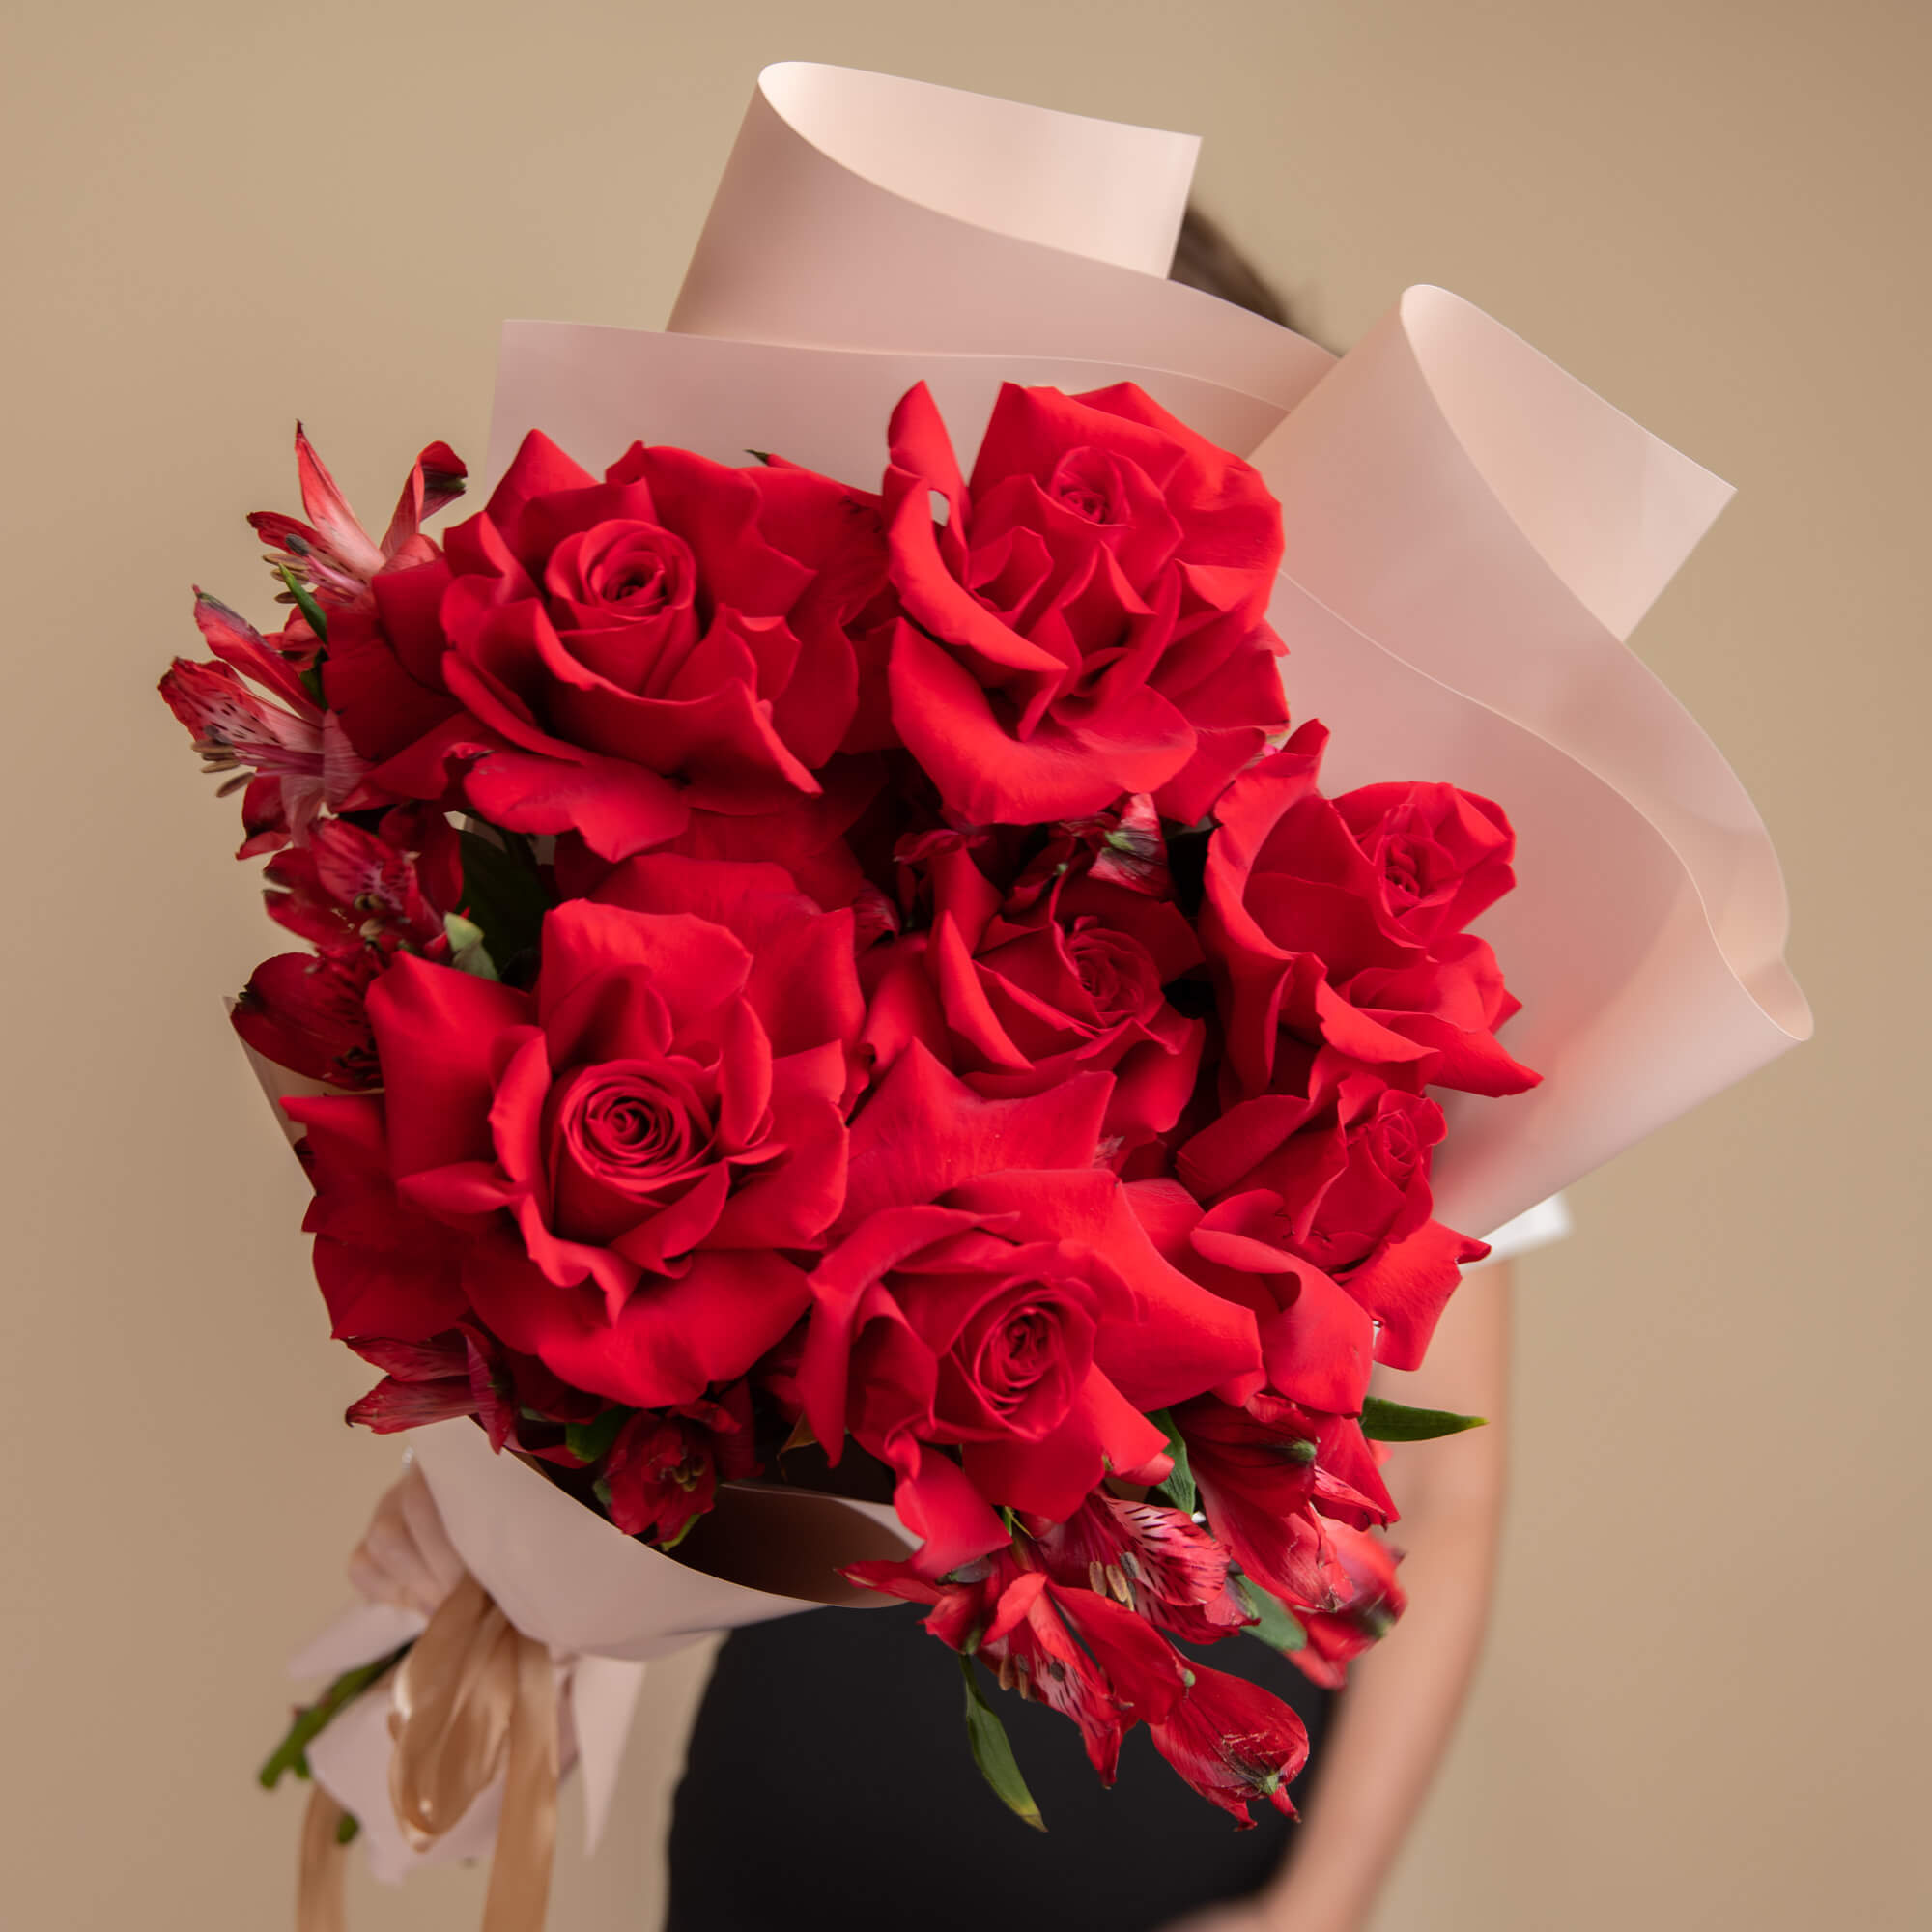 Bouquet with roses and red alstroemeria